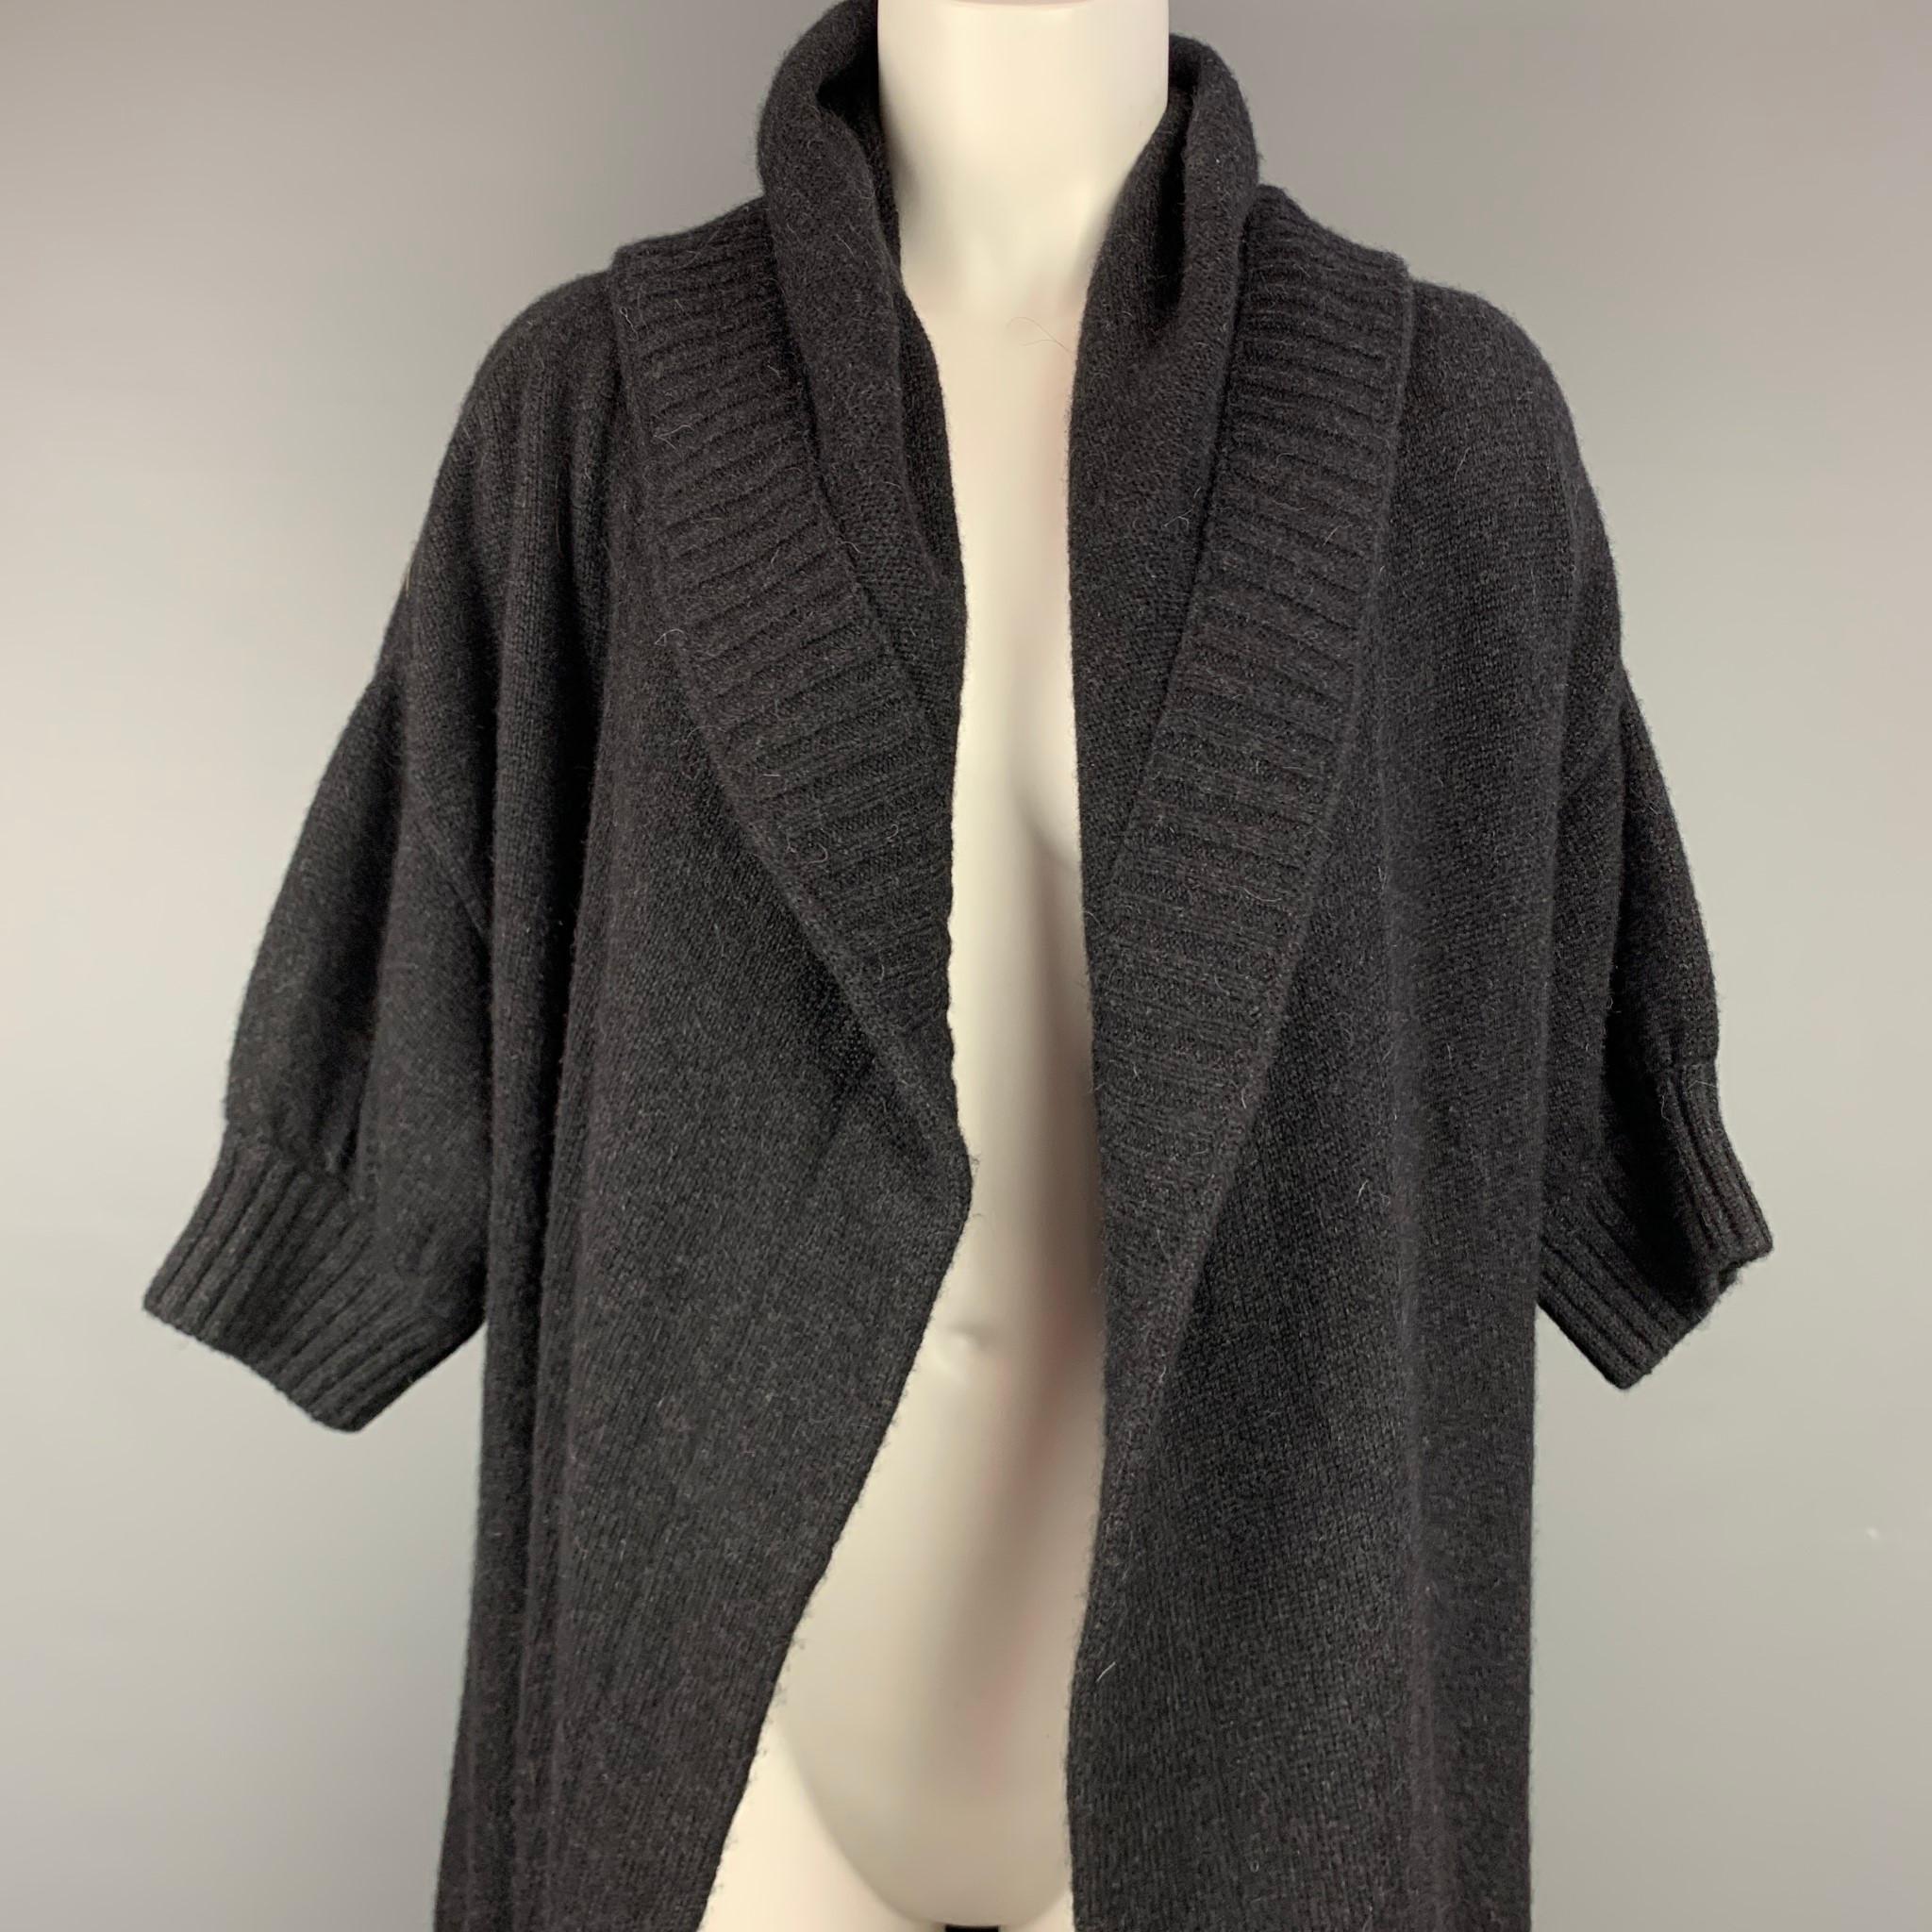 VINCE cardigan comes in a charcoal knitted alpaca blend featuring front pockets, hooded style, and a open front. 

Very Good Pre-Owned Condition.
Marked: S

Measurements:

Shoulder: 21 in.
Bust: 40 in.
Sleeve: 10 in.
Length: 30.5 in. 